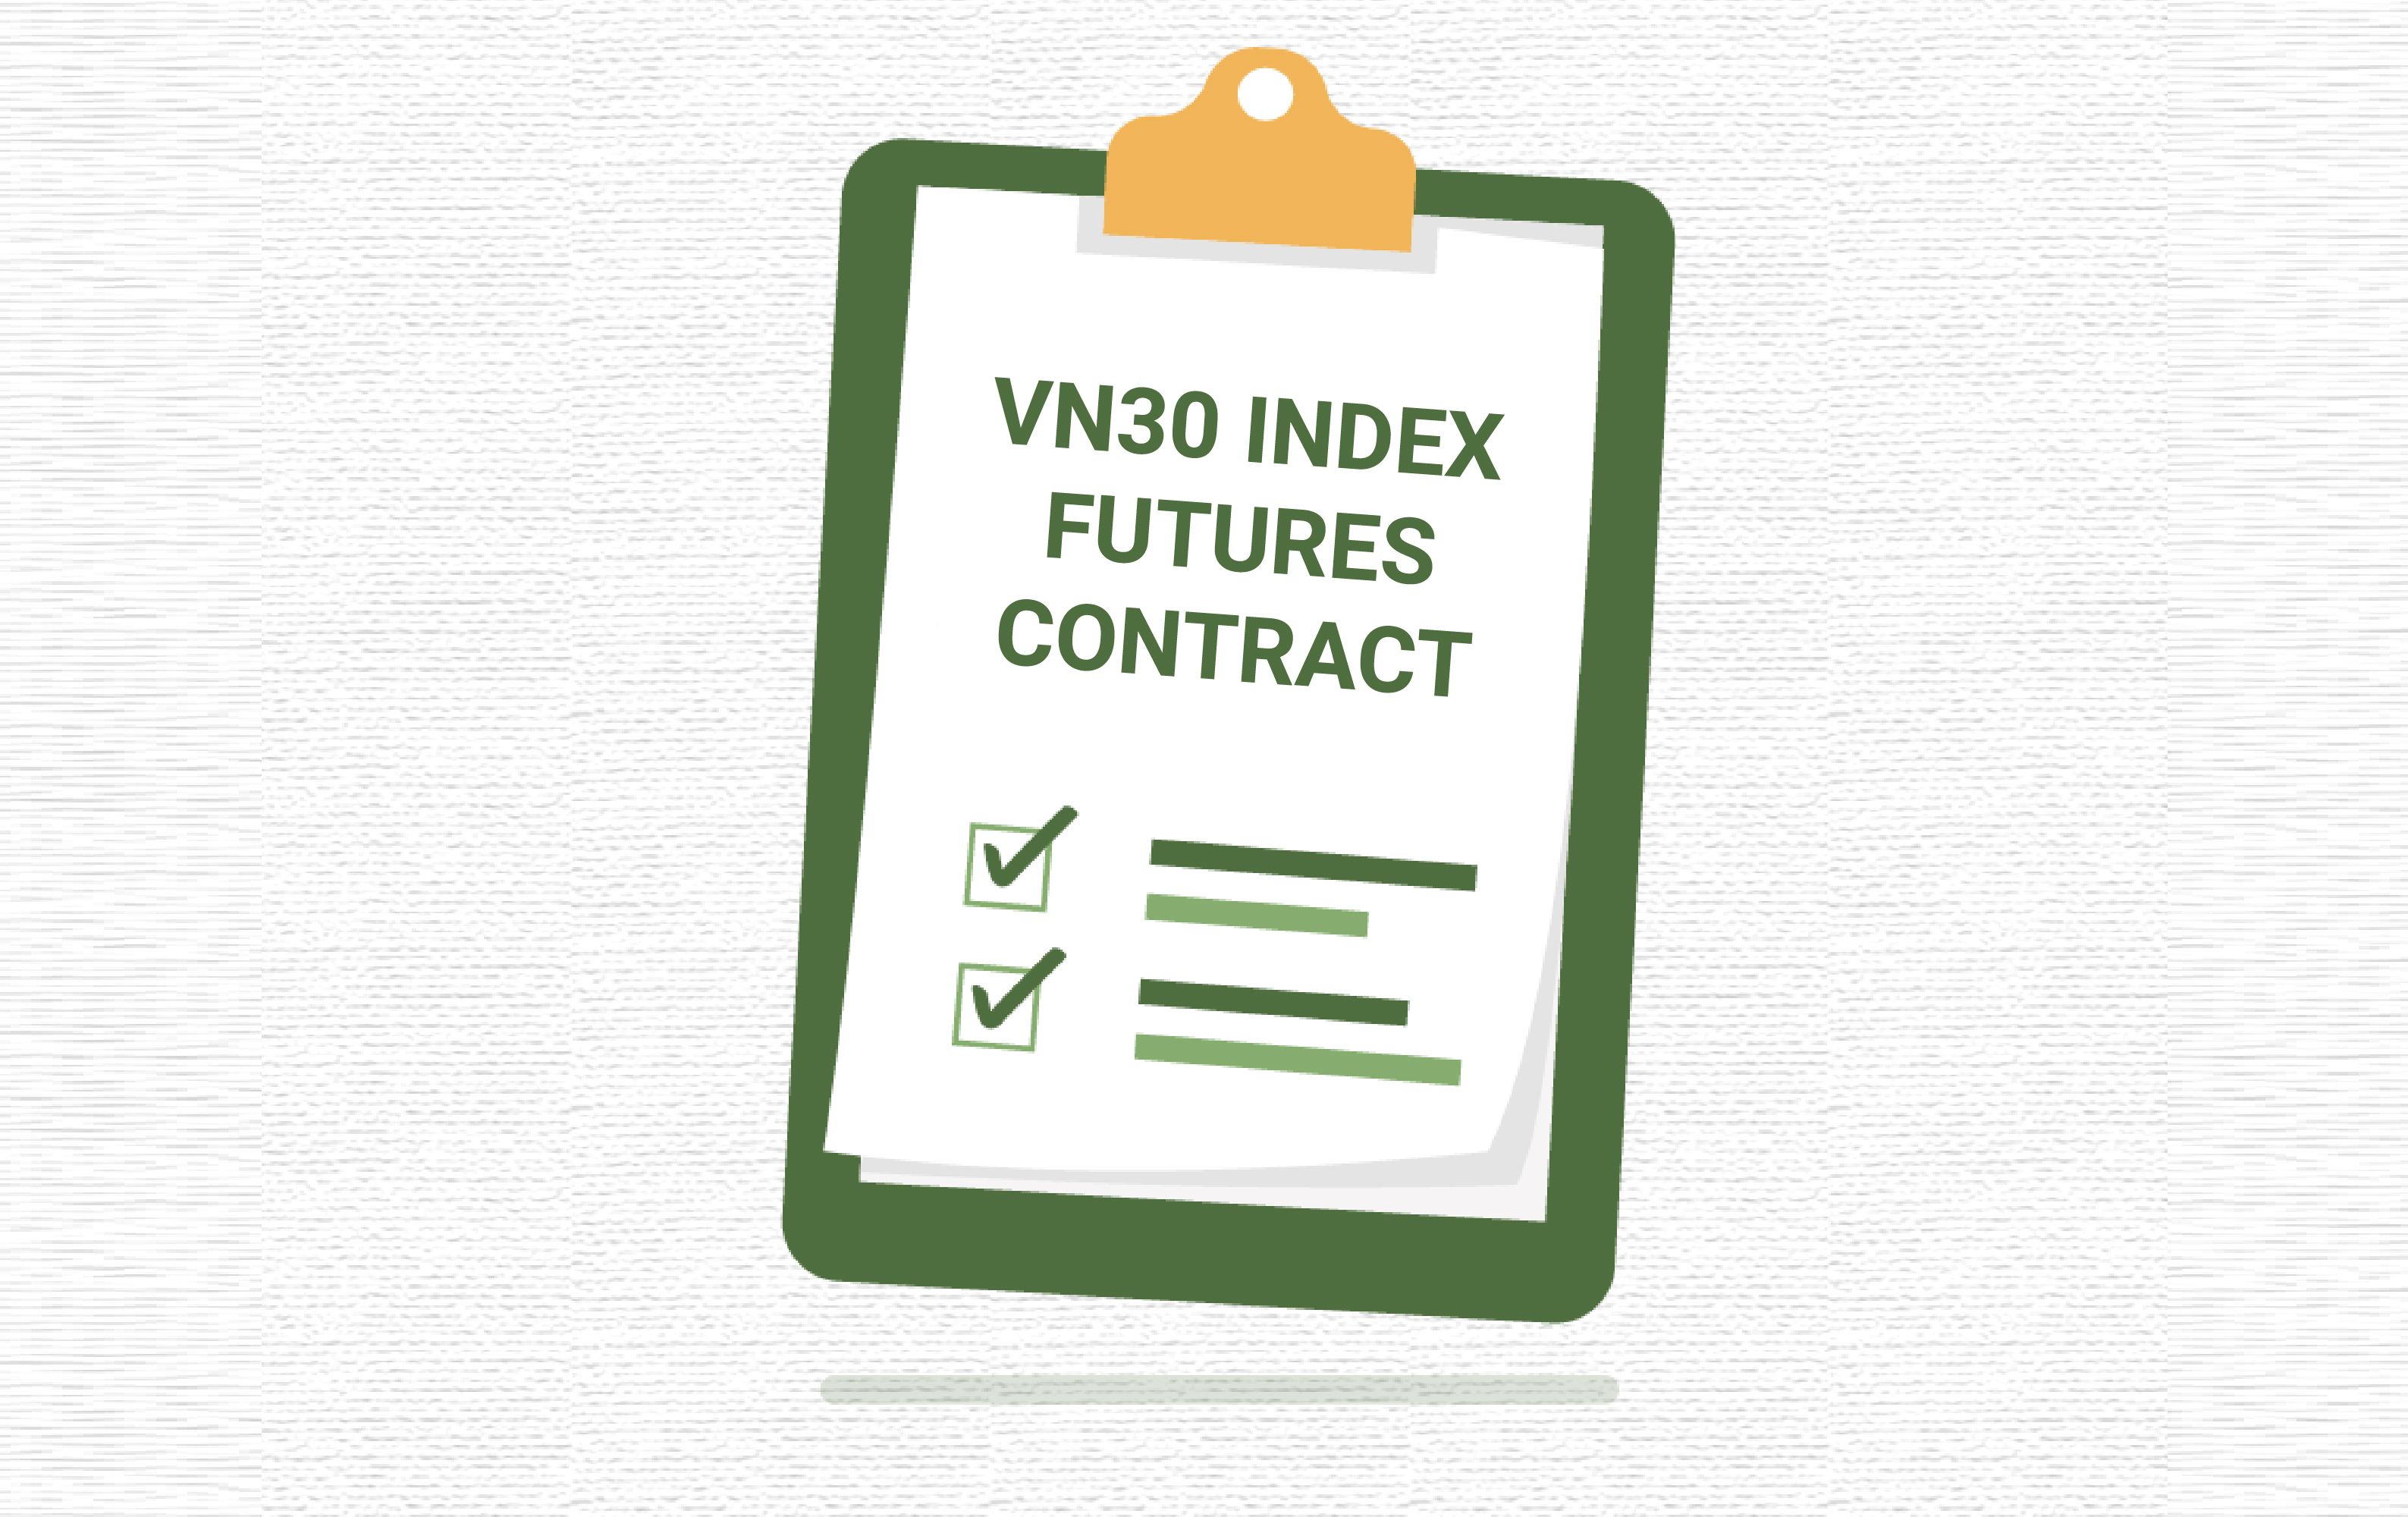 V N30 Index Futures Contract